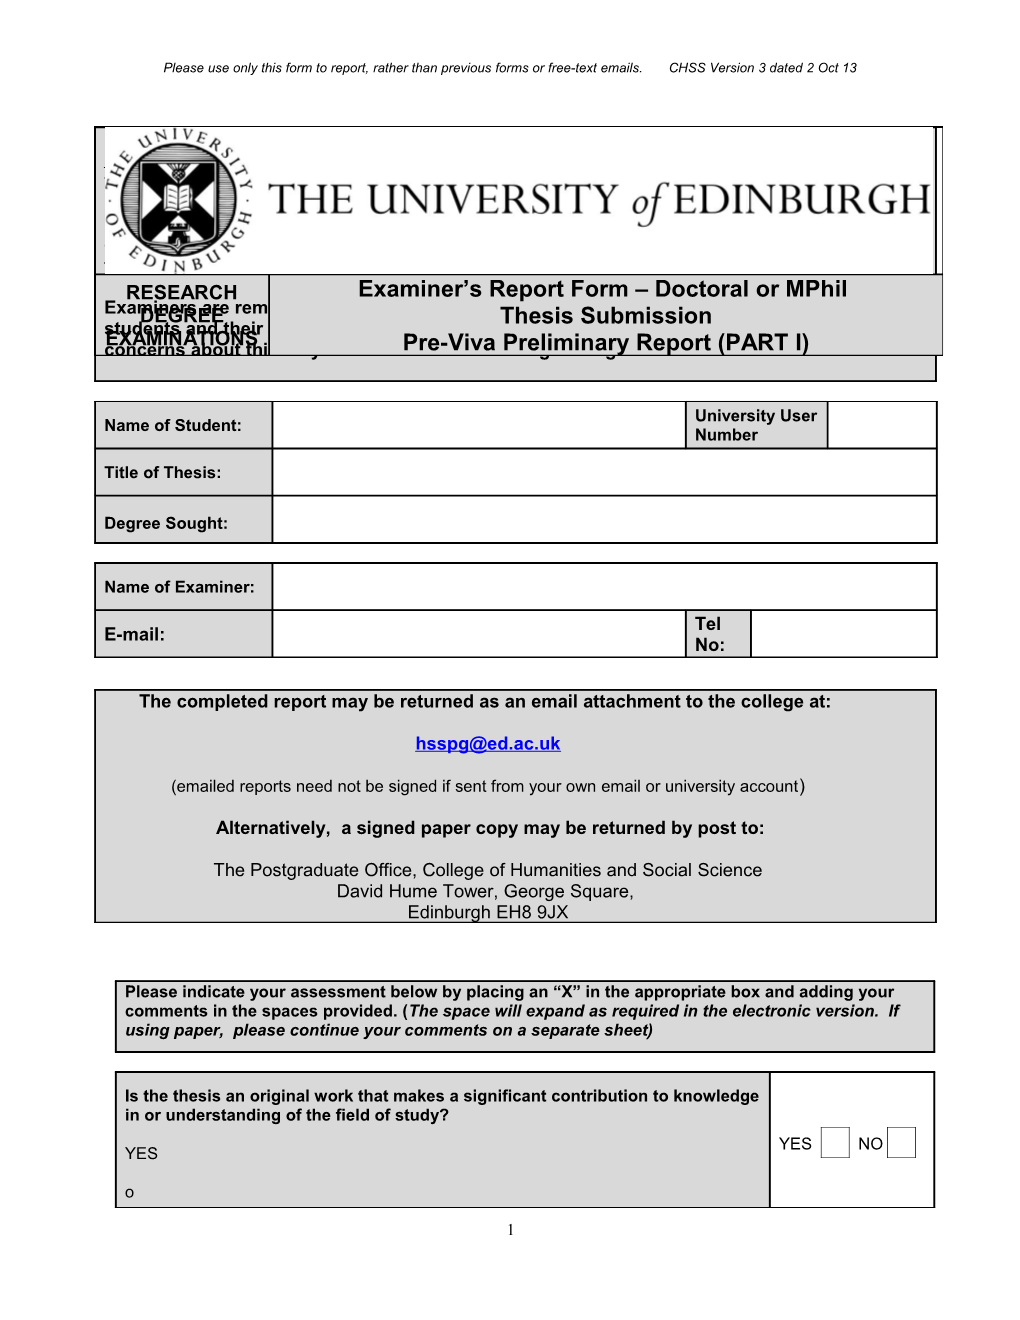 Please Use Only This Form to Report, Rather Than Previous Forms Or Free-Text Emails. CHSS